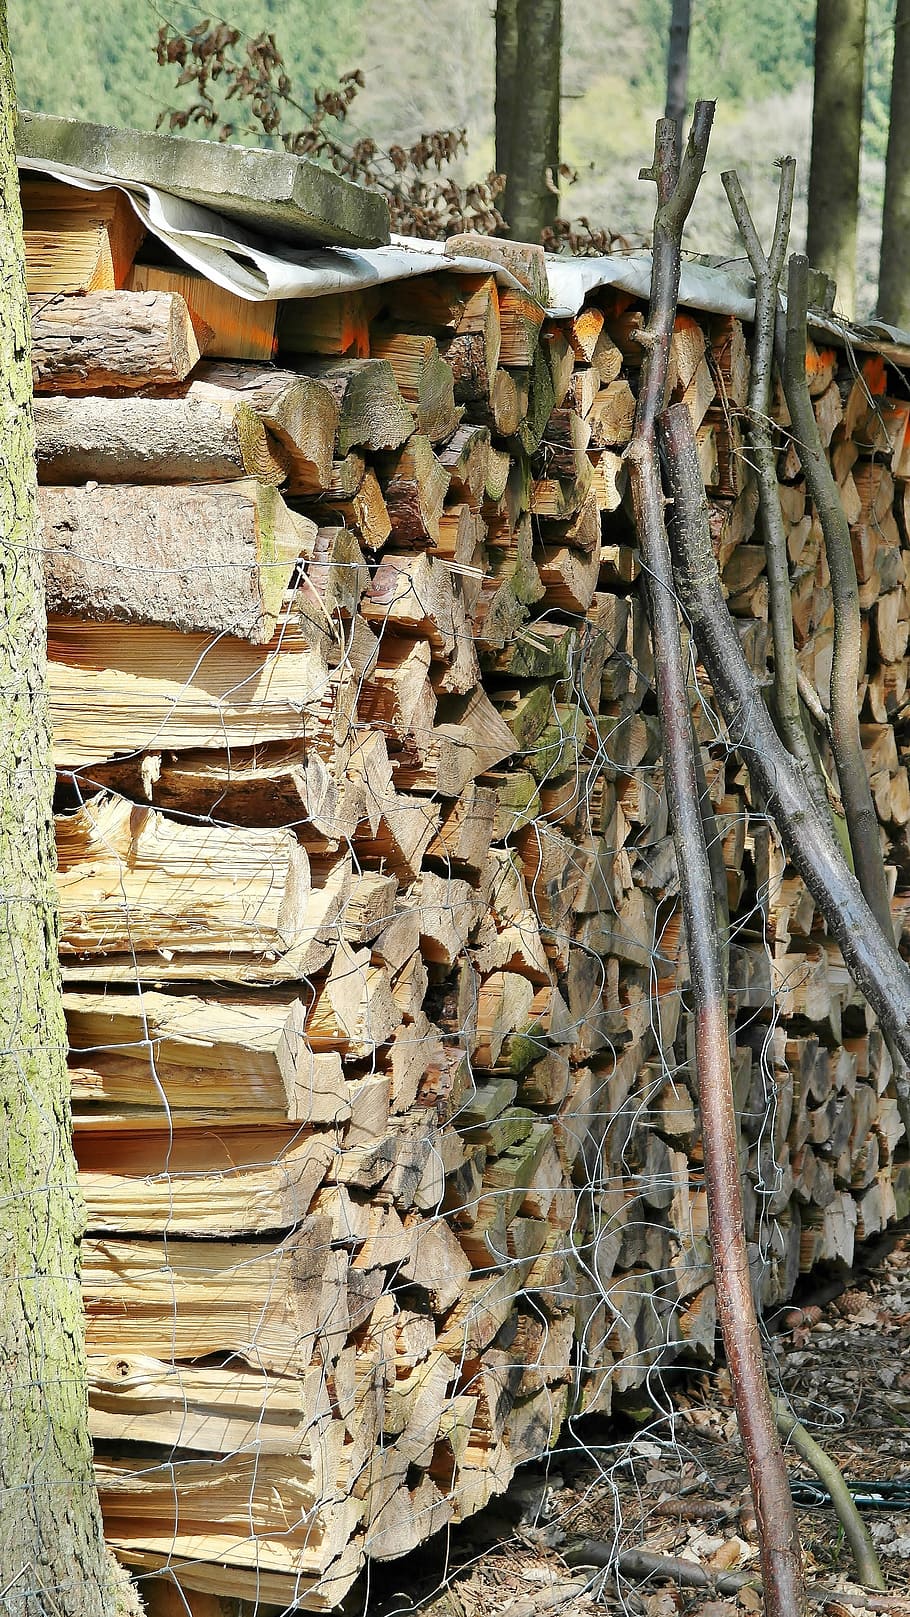 wood, holzstapel, tree trunks, forestry, log, timber industry, cut down, lumberjack, timber, strains